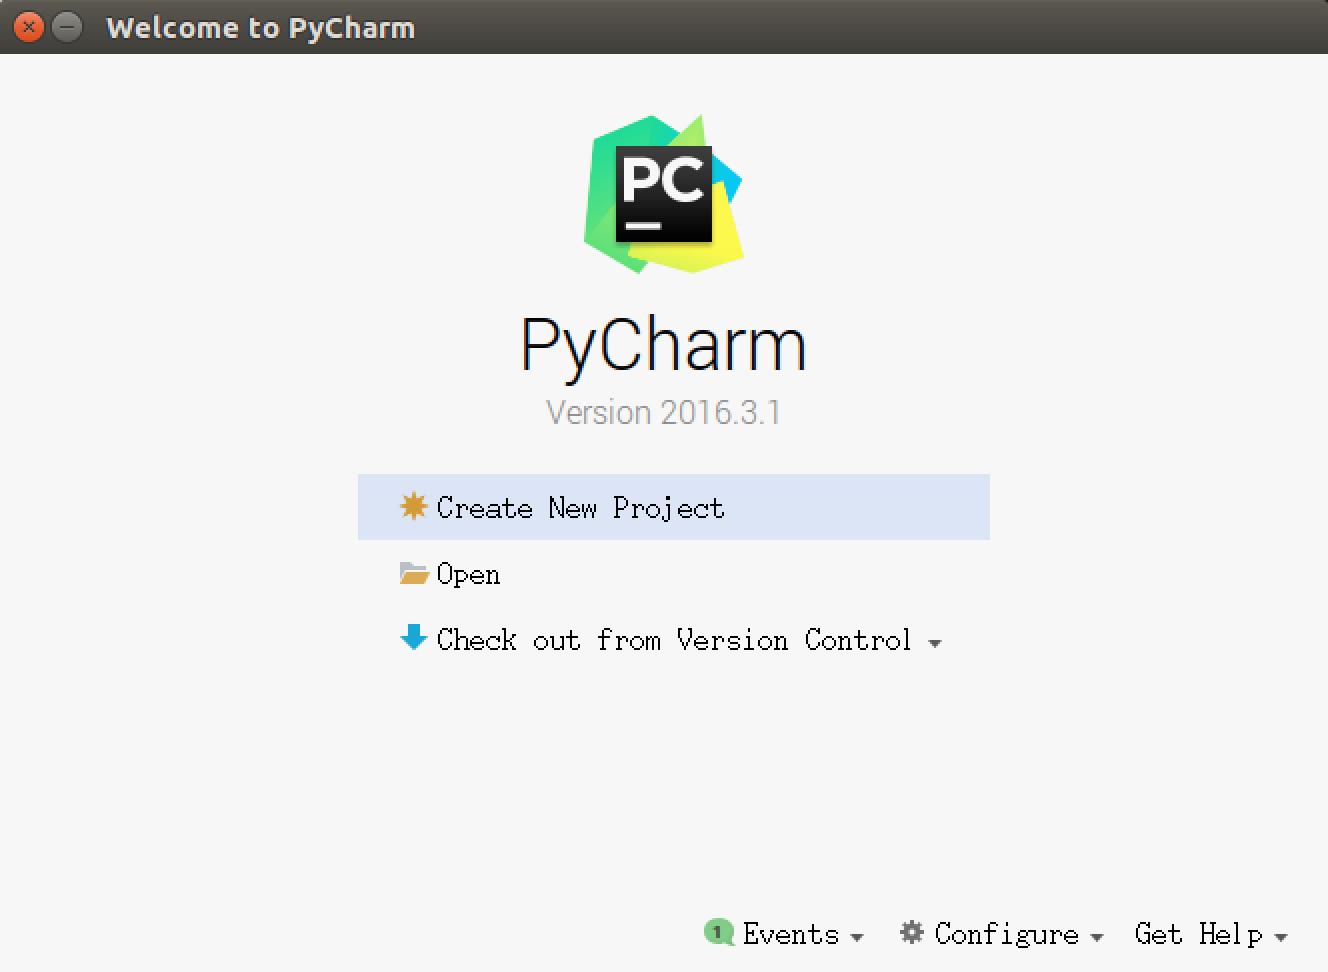 004_PyCharm welcome page -w664